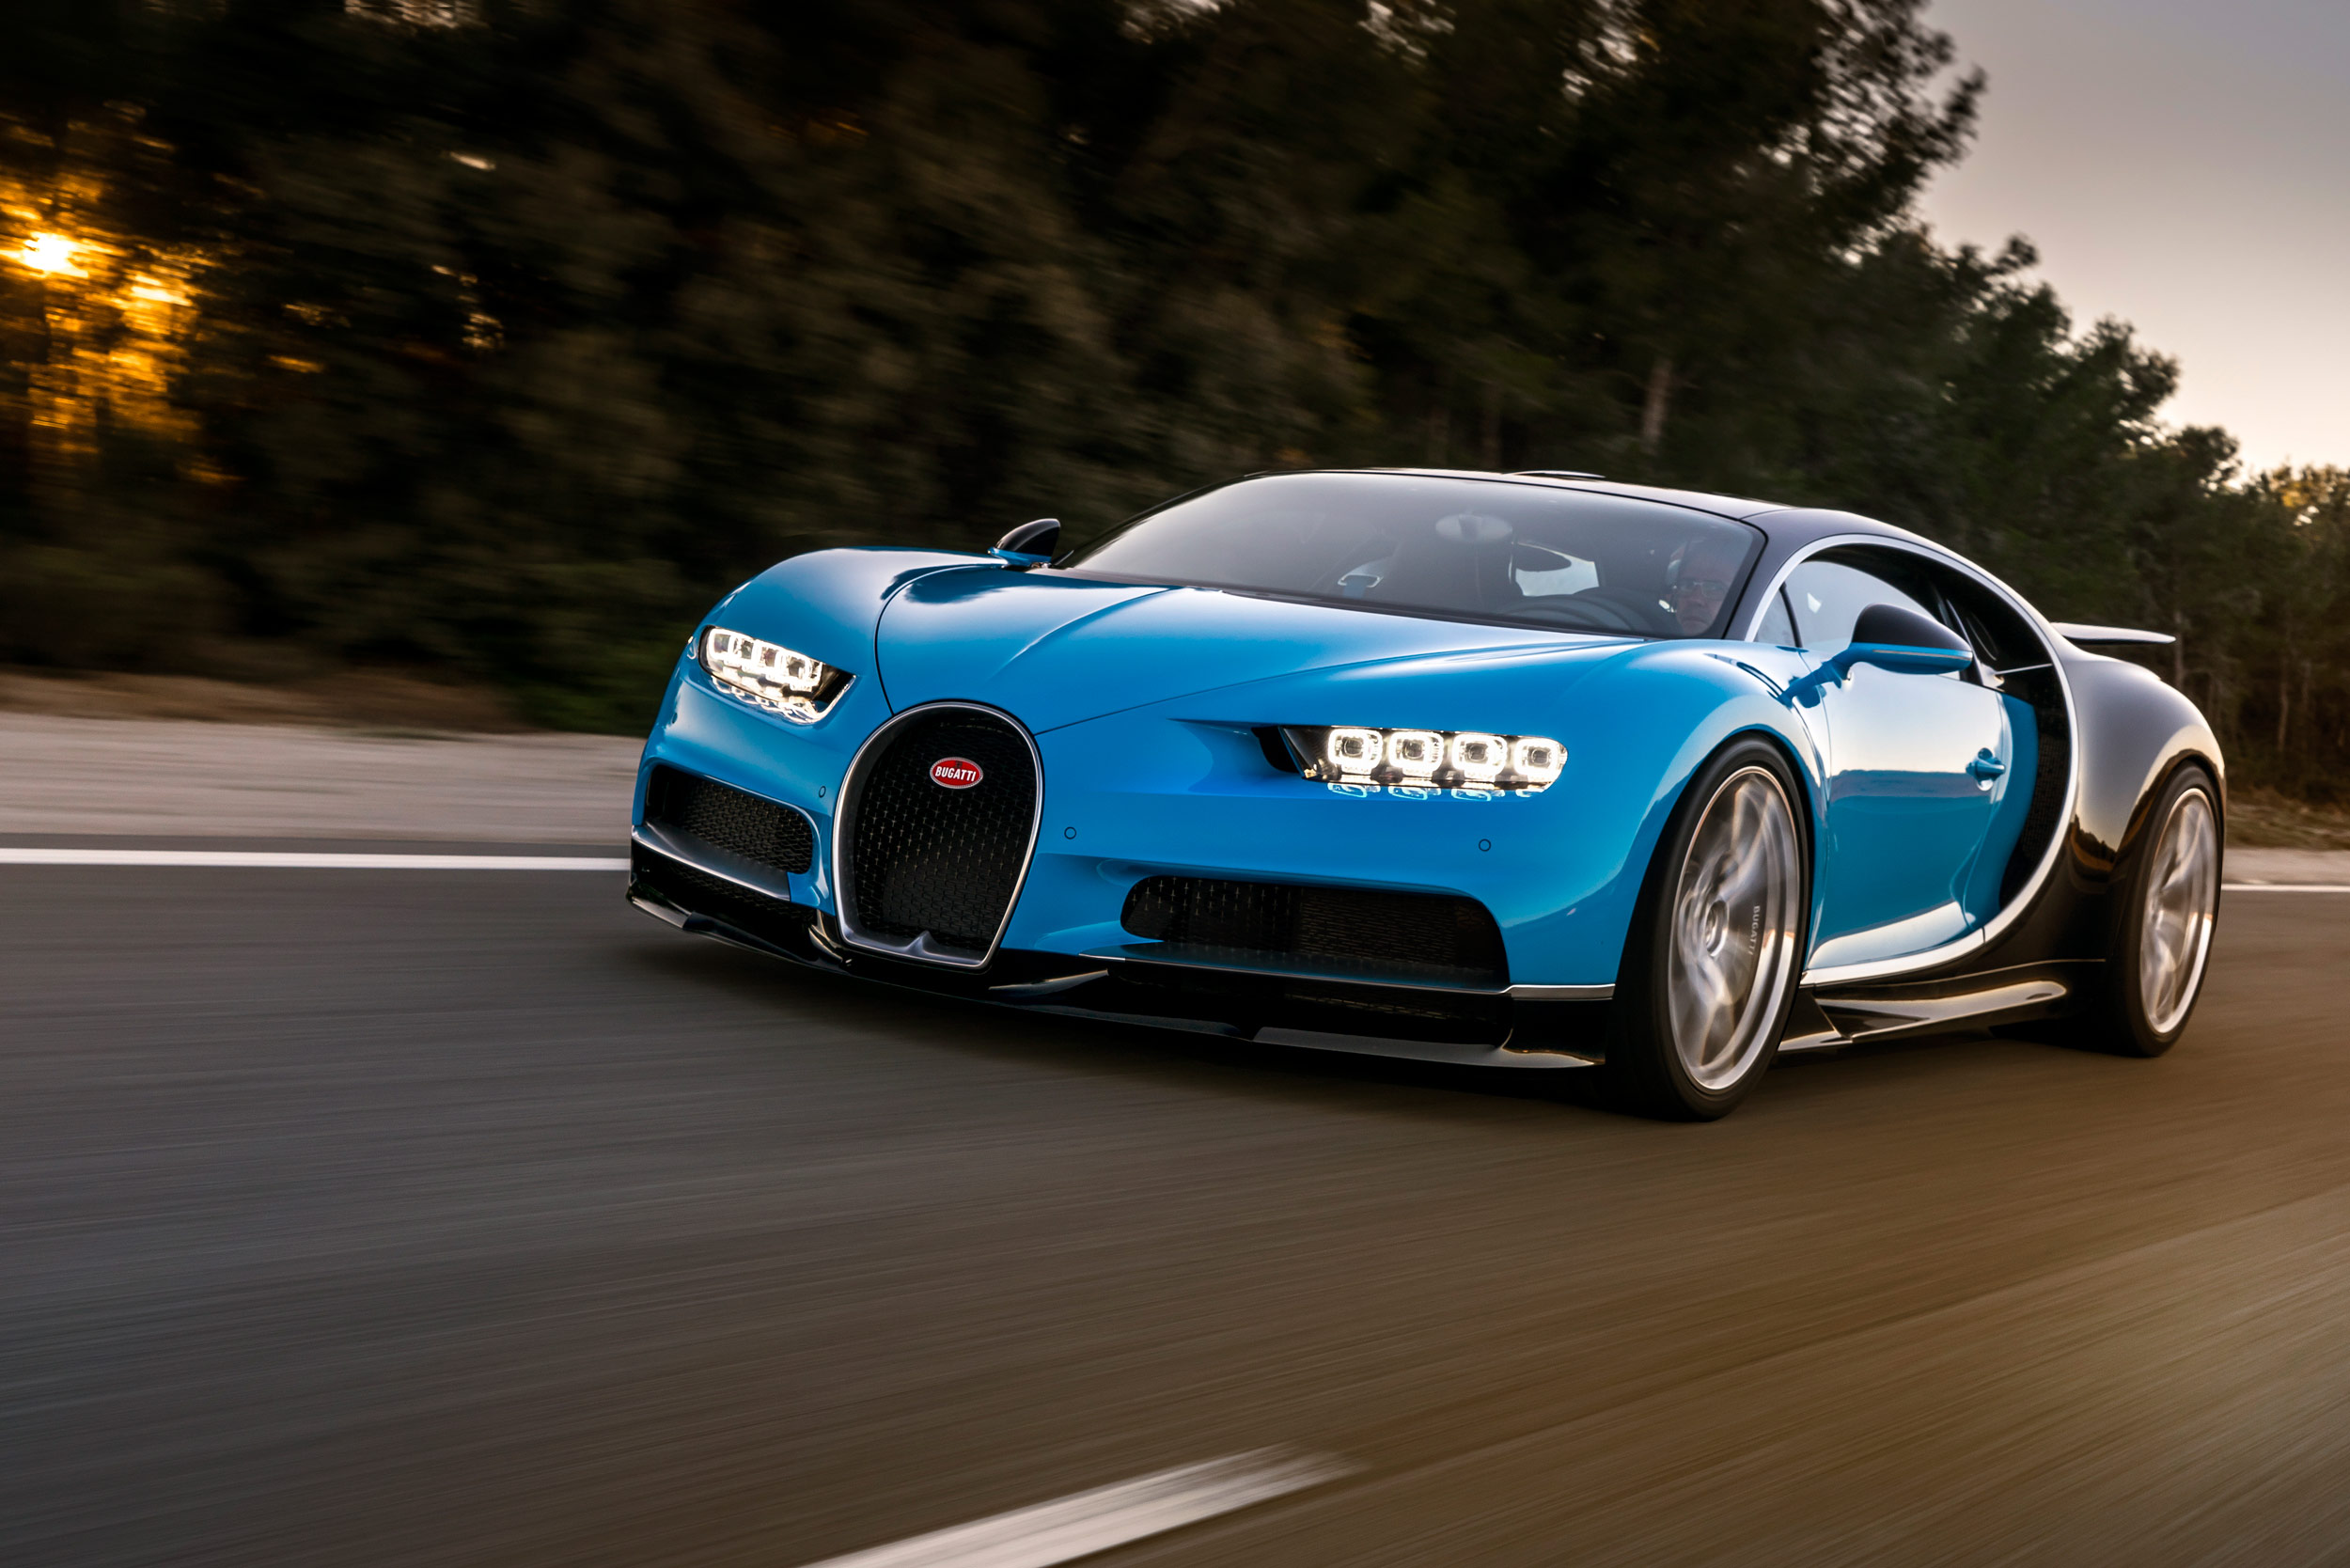 20 mind-blowing facts about the 2016 Bugatti Chiron supercar